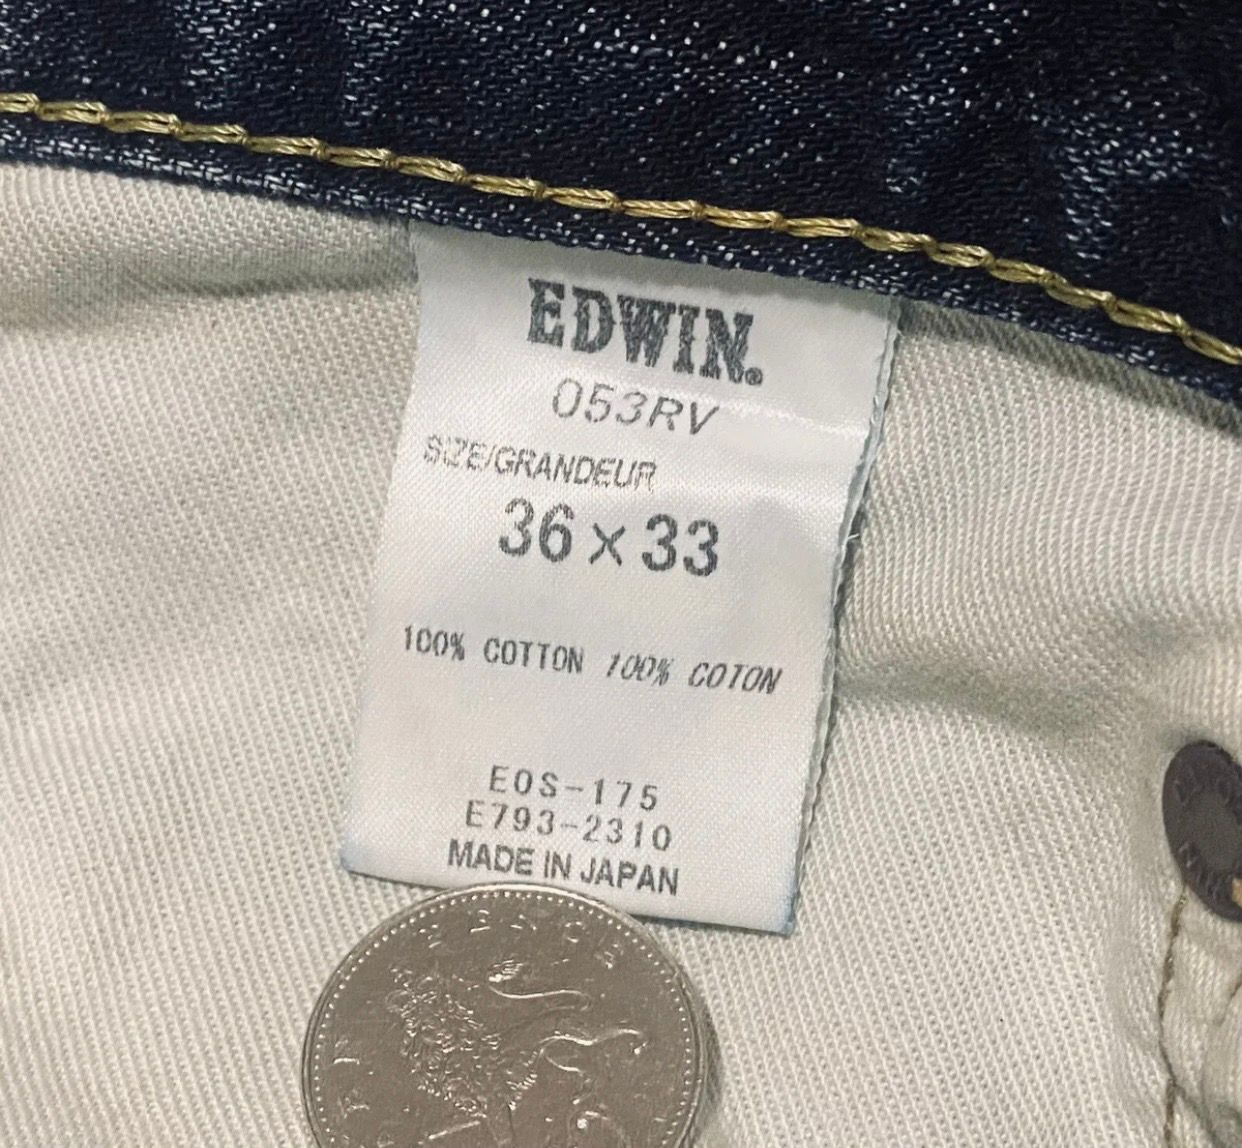 EDWIN Rebel Model 053RV Made IN Japan With Rips Cotton Jeans - 12